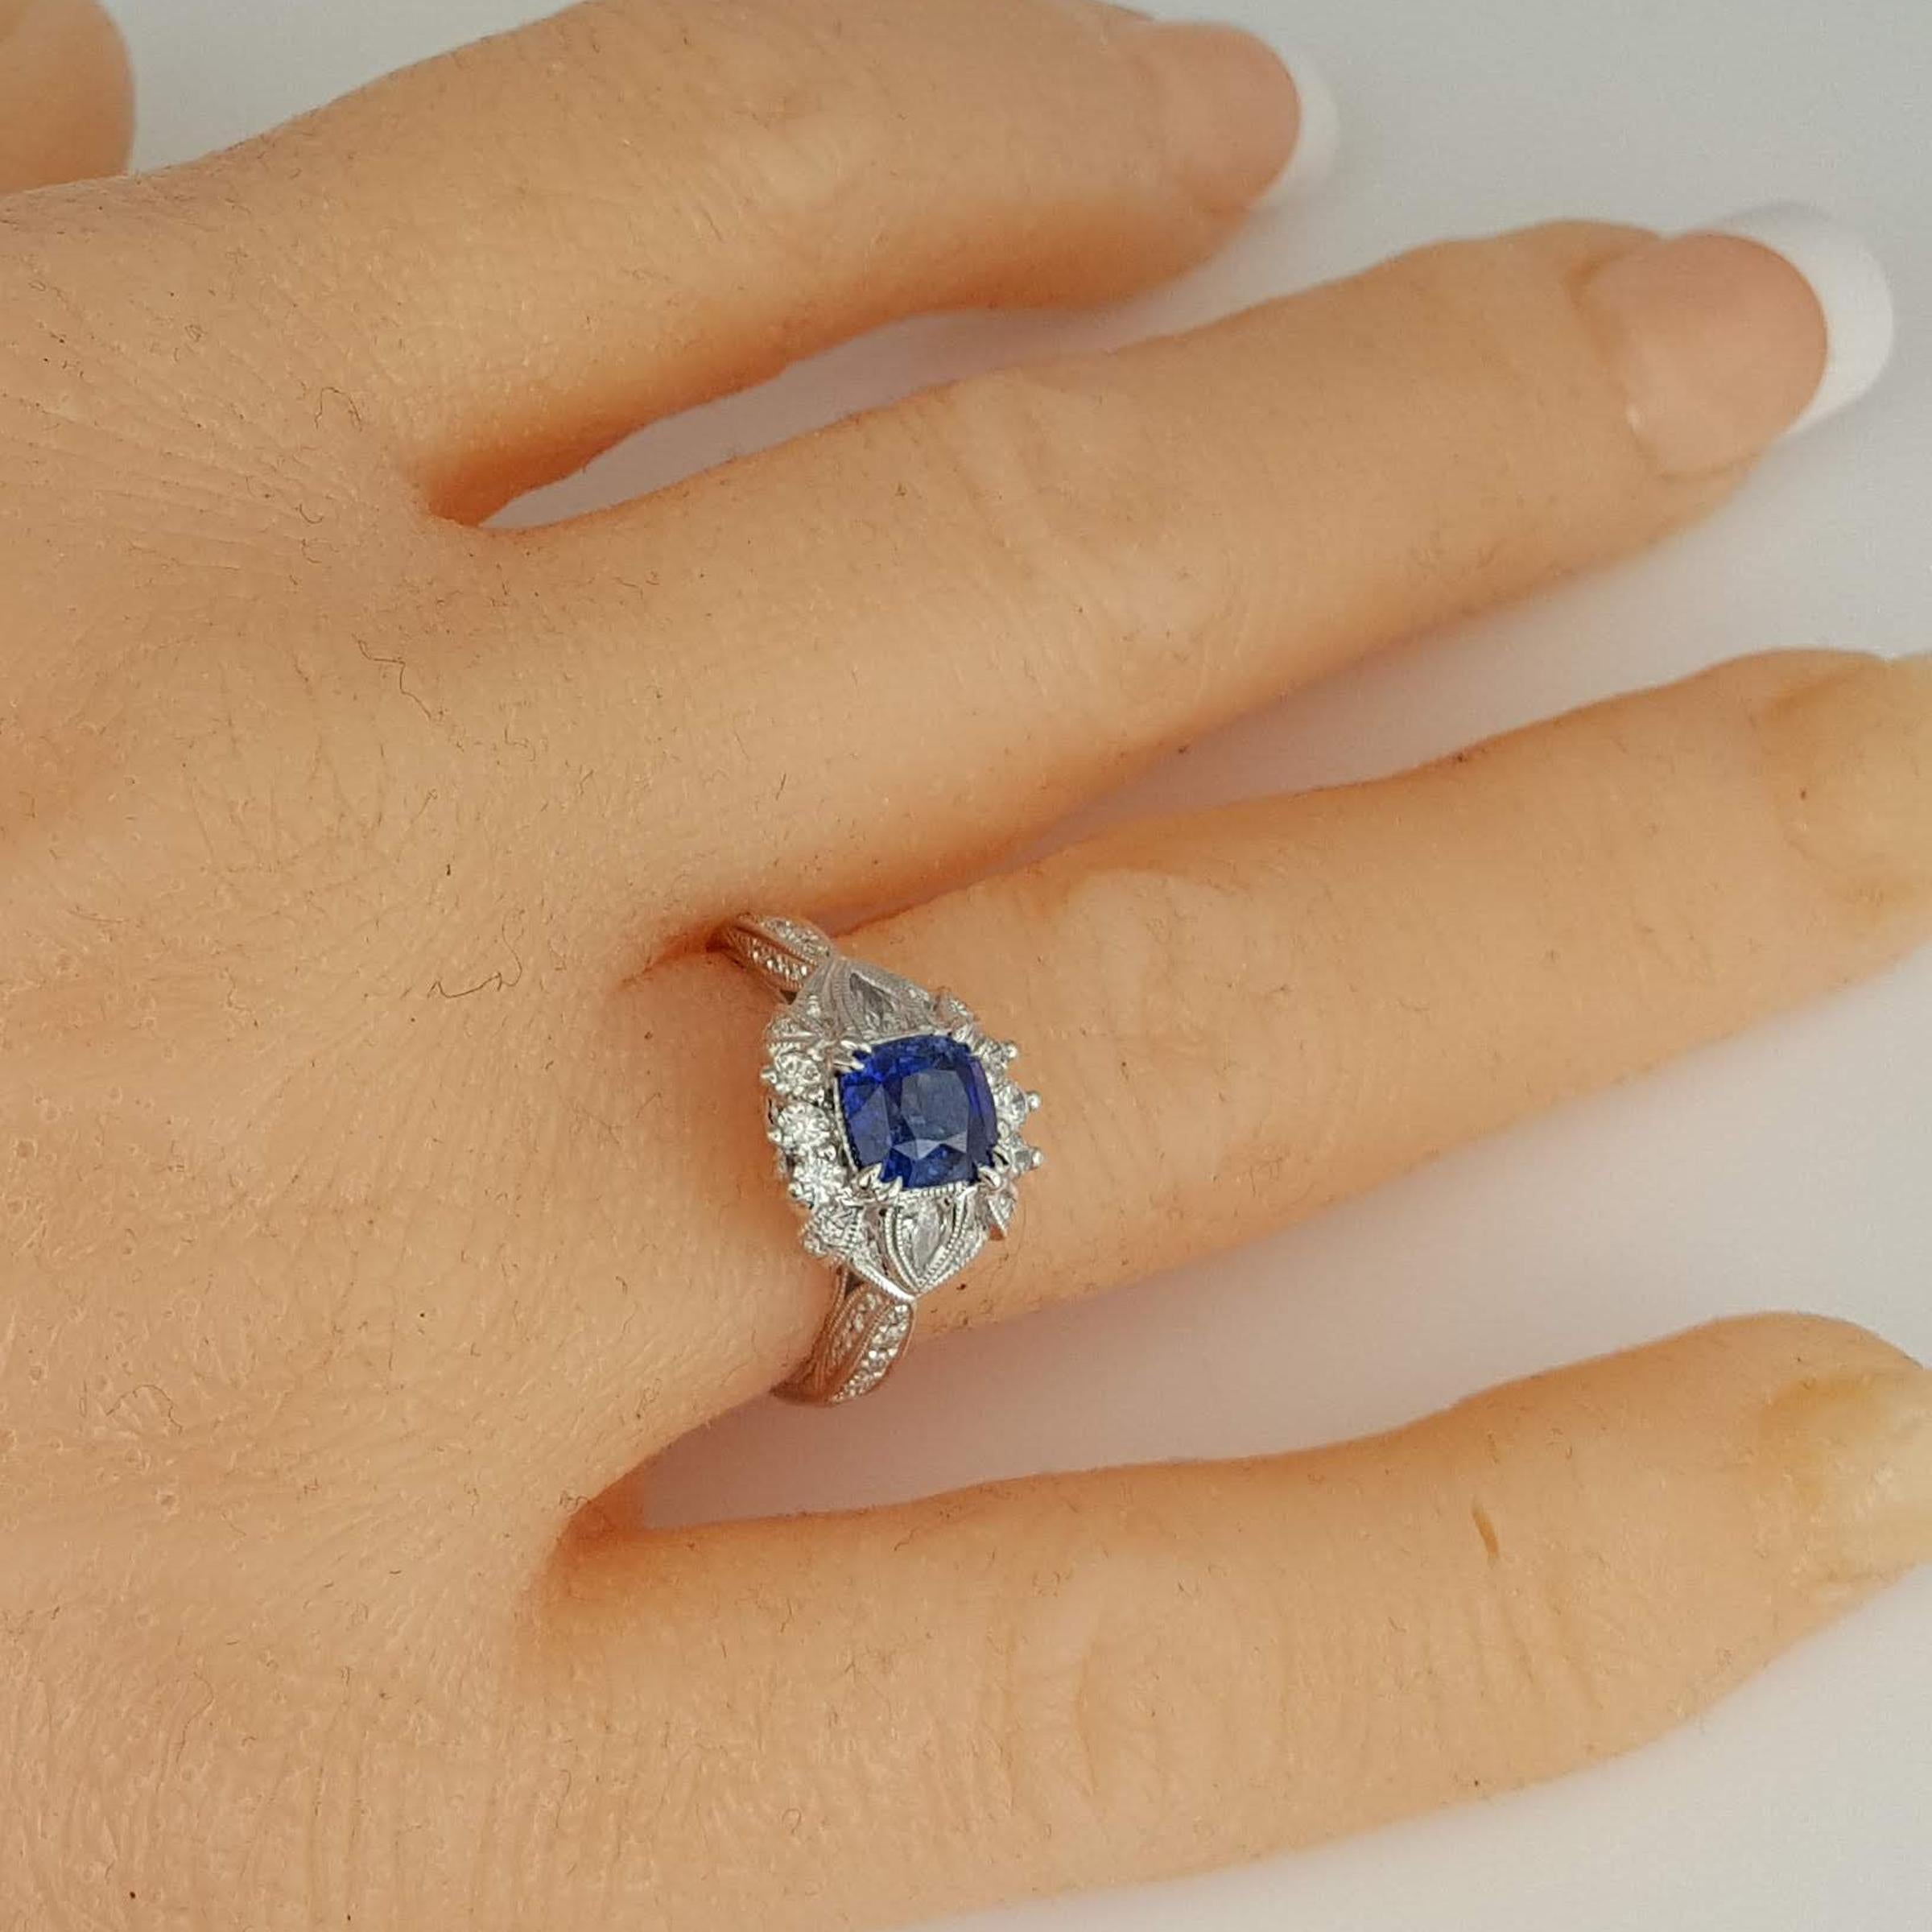 Women's 1.6 Carat Cushion Cut Blue Sapphire Ring with 0.63 Carat Natural Diamond ref1364 For Sale